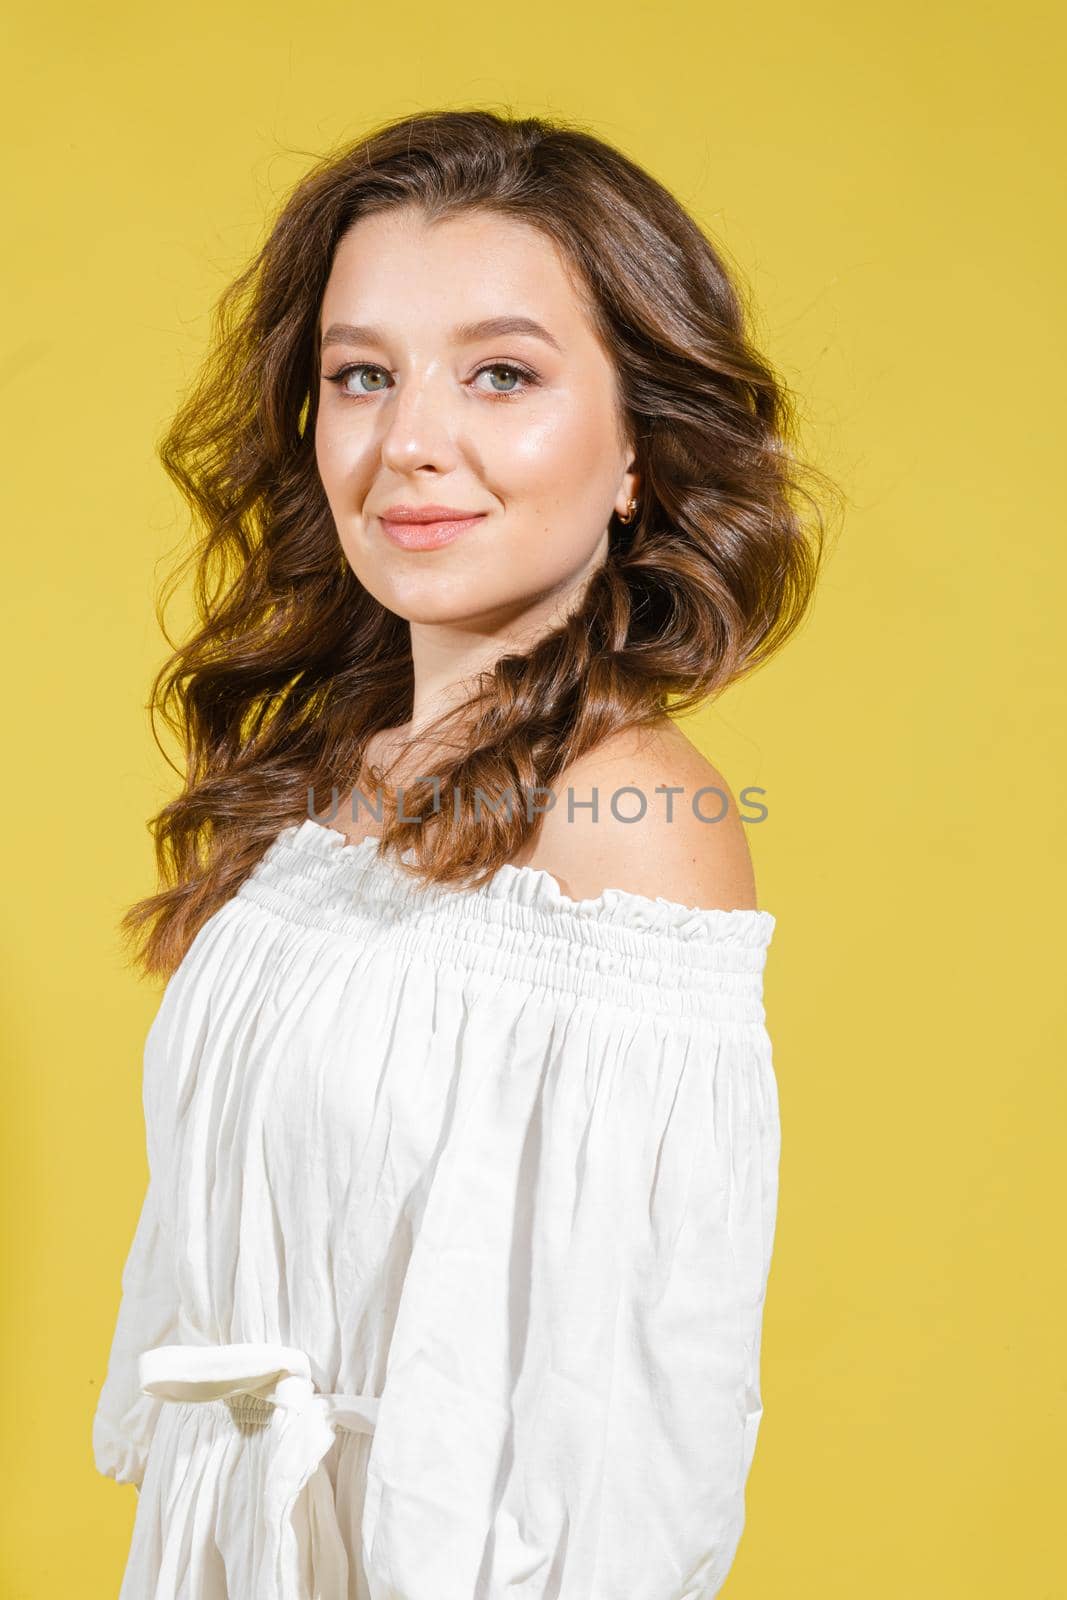 Beautiful bright woman in the studio on a yellow background in a white light dress smiling happy,